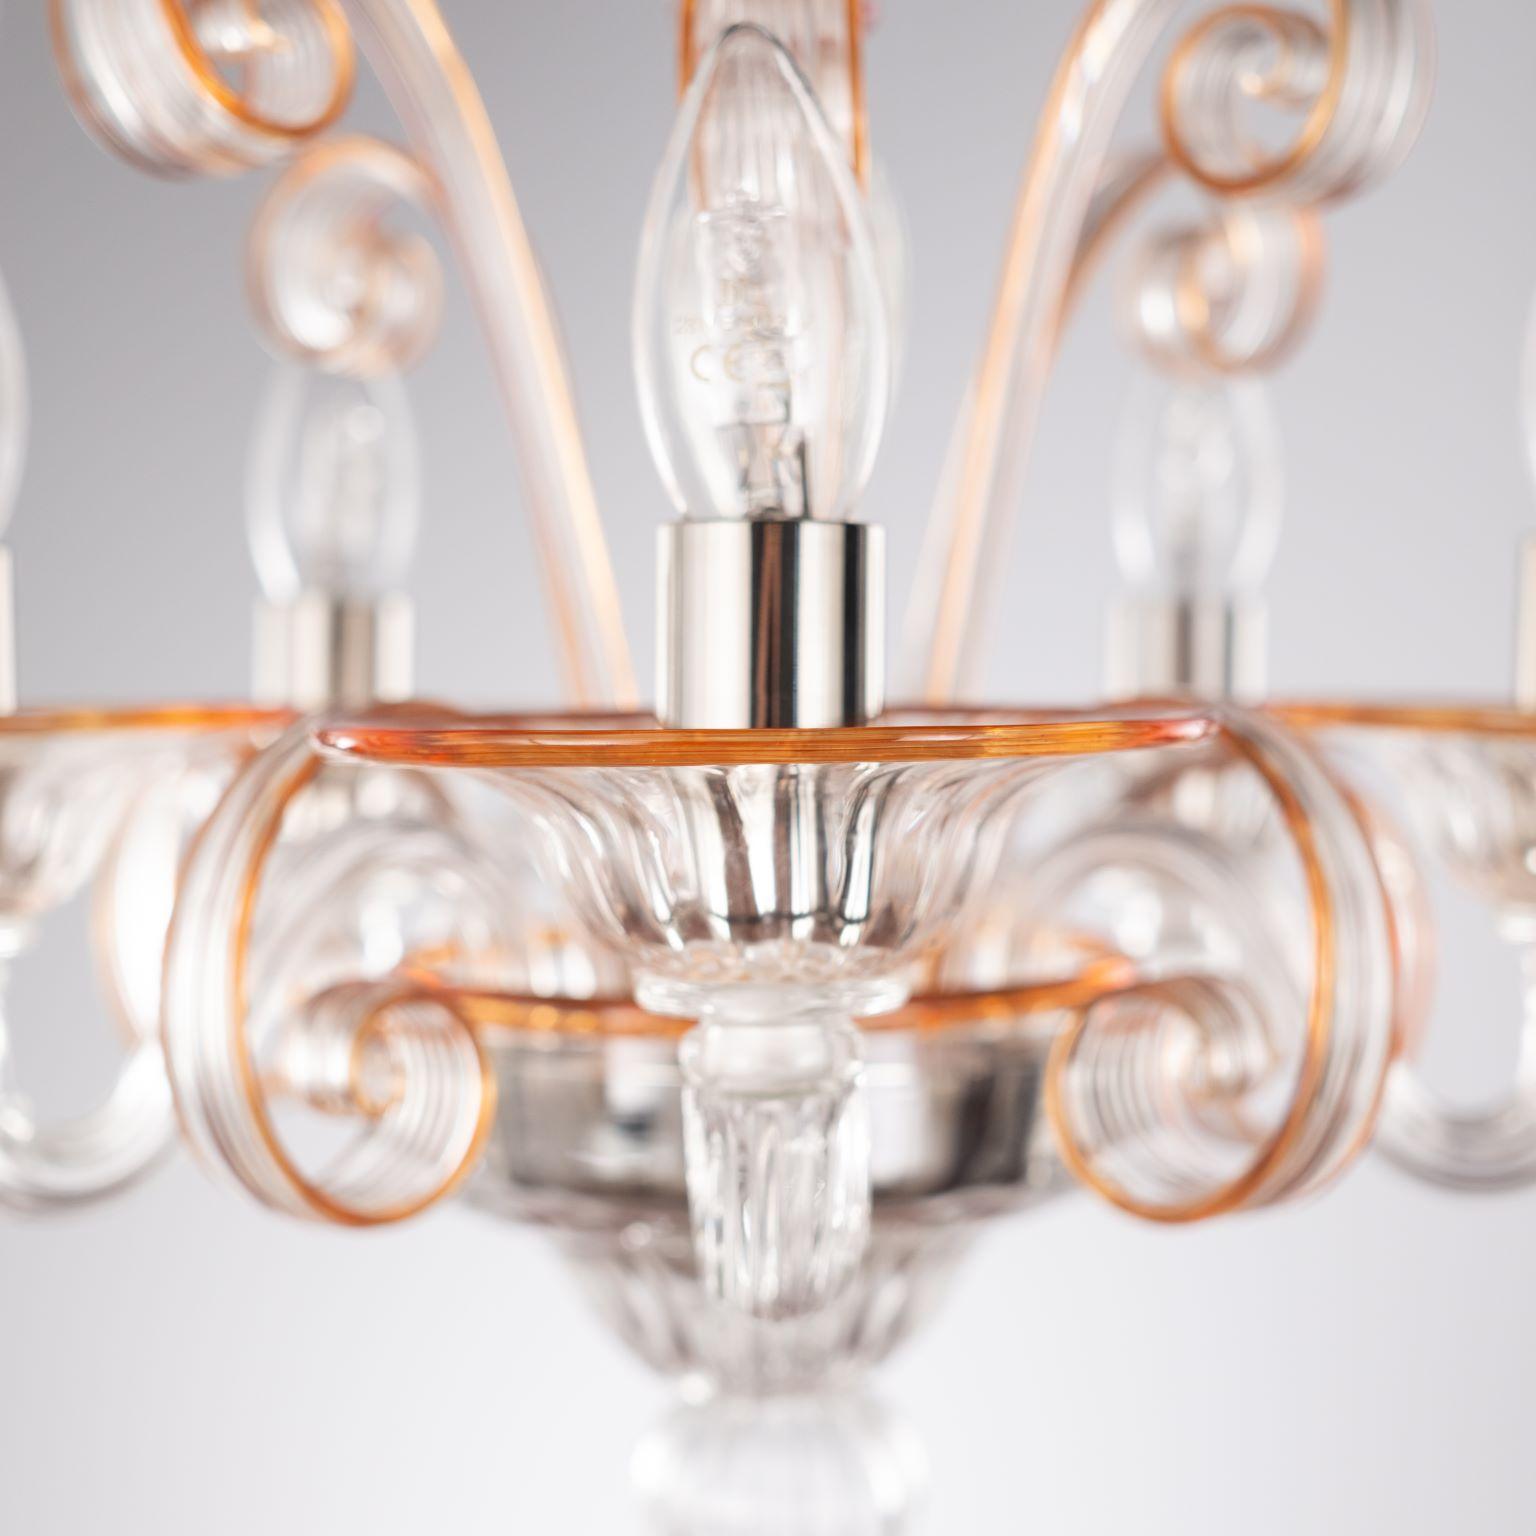 Chandelier 5 Arms Clear Murano Glass, Orange Details by Multiforme In New Condition For Sale In Trebaseleghe, IT